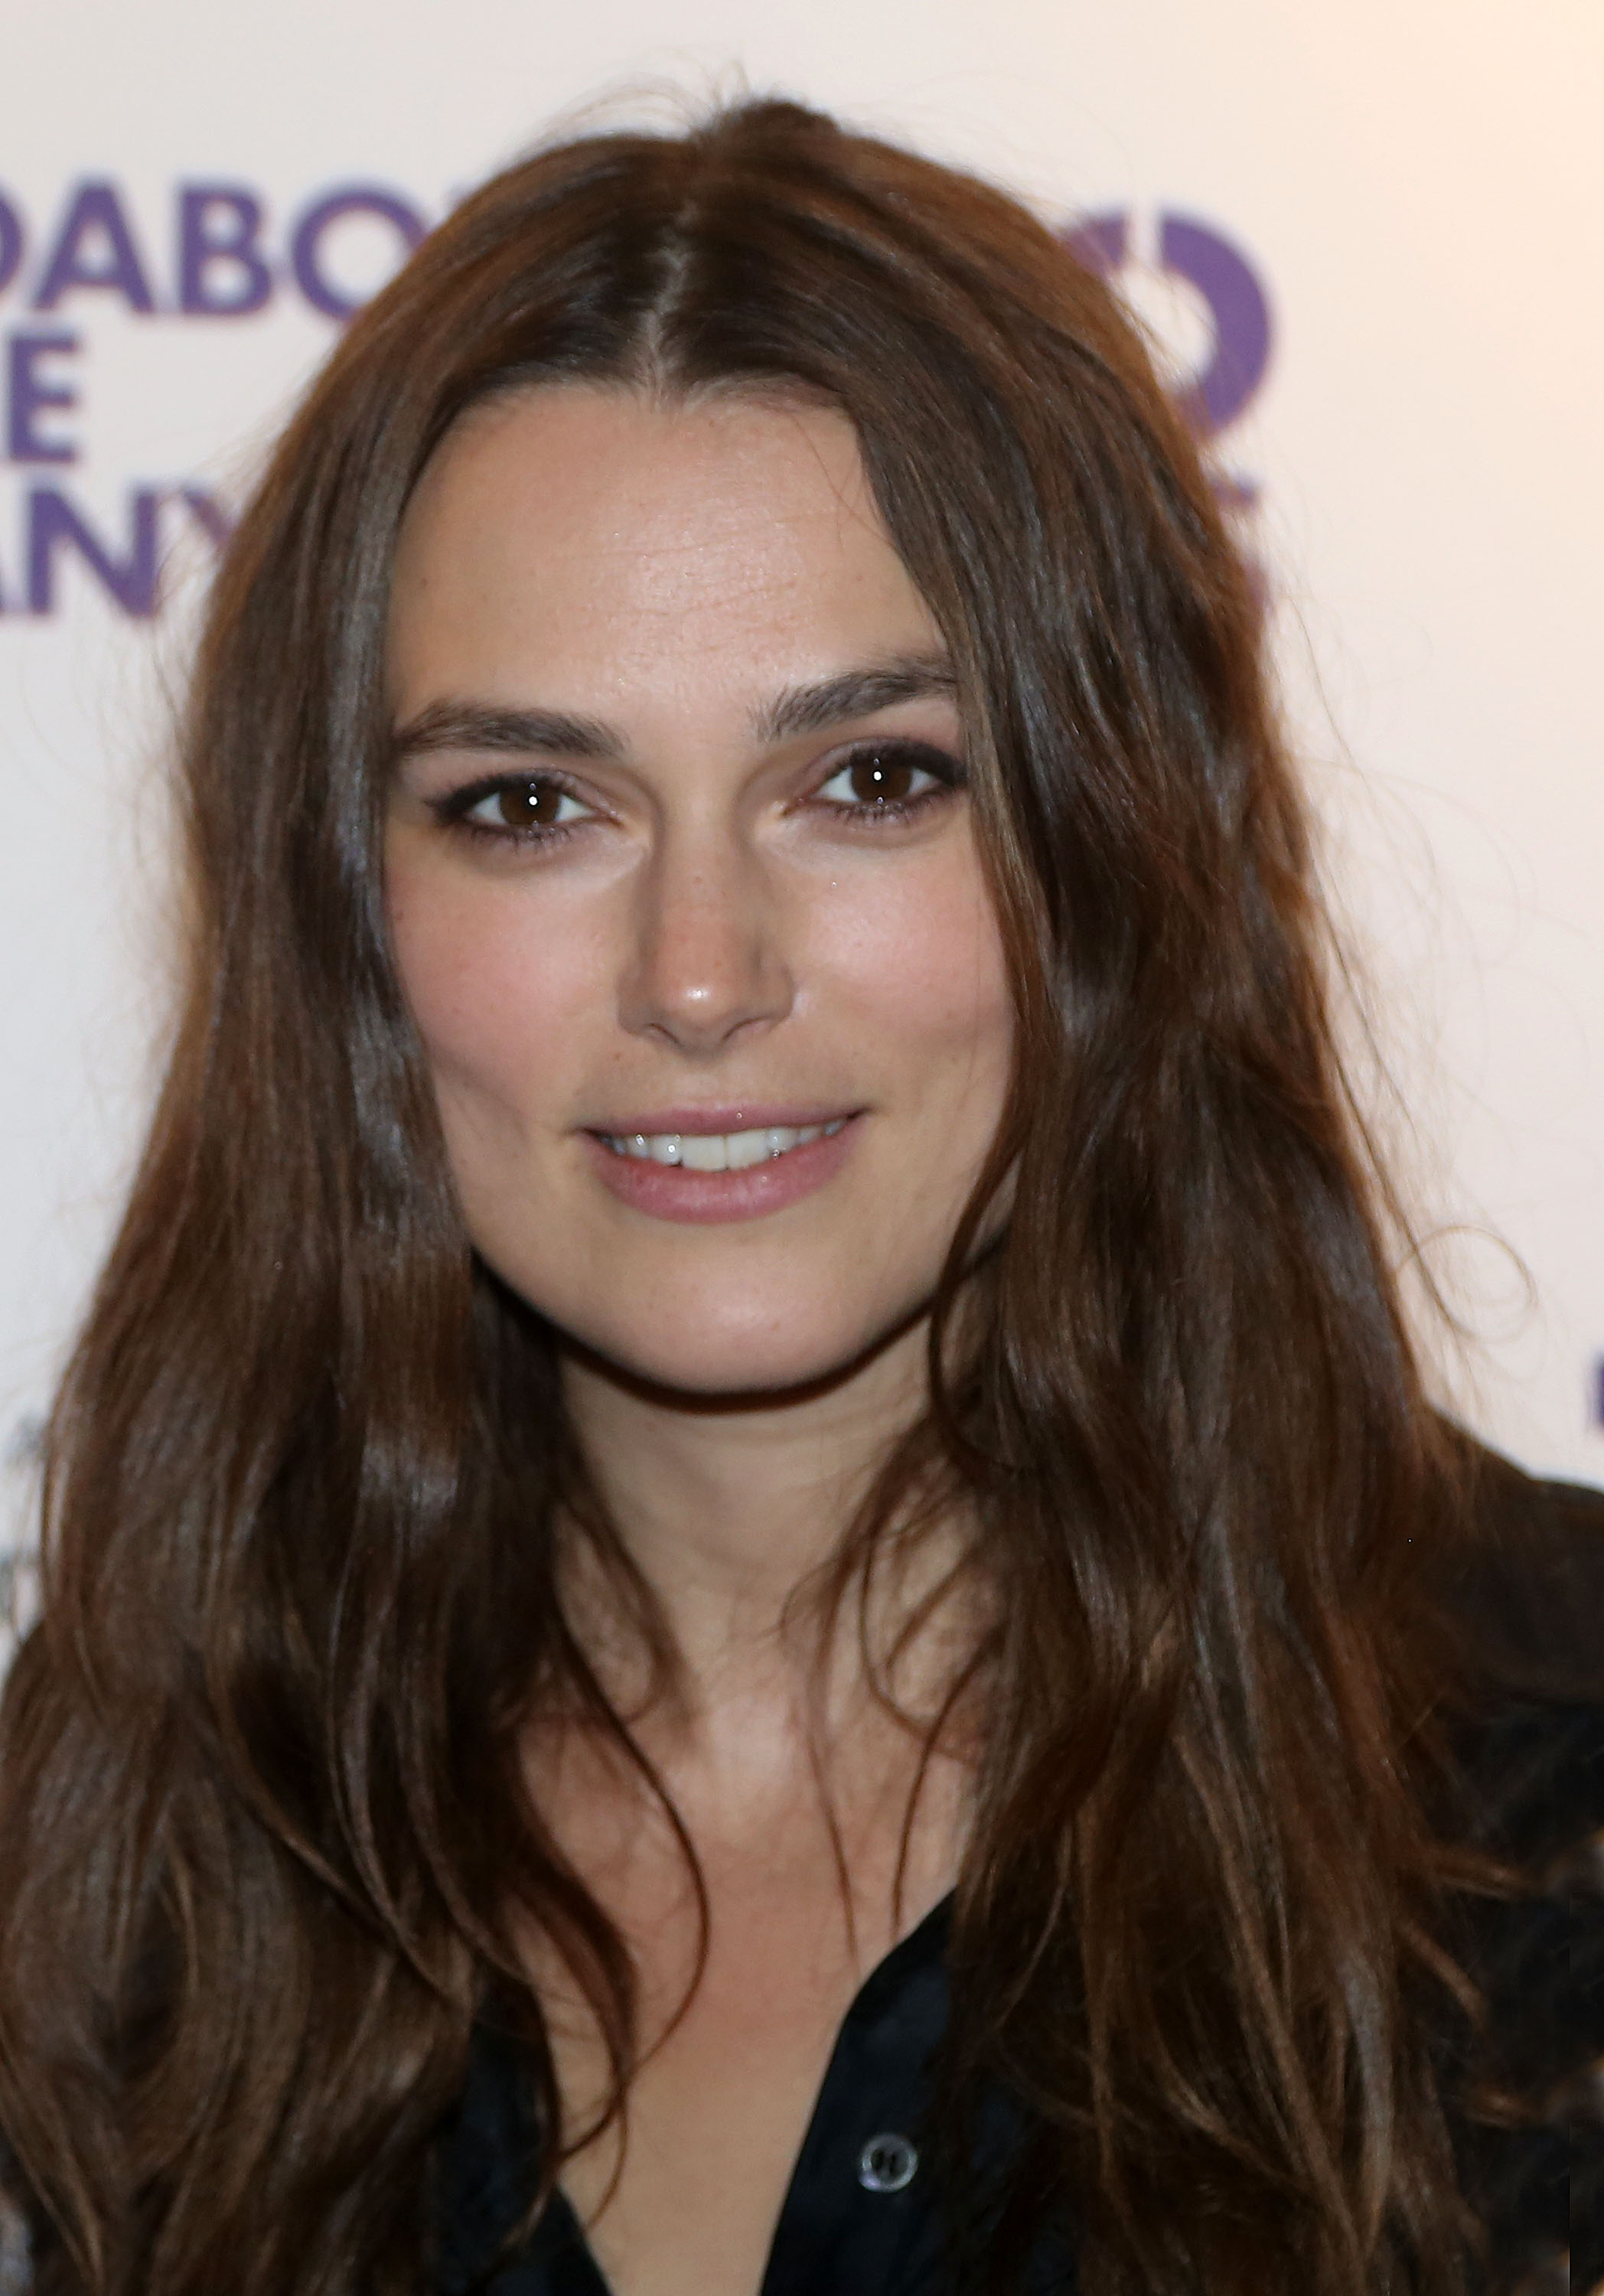 Keira Knightley at the Roundabout Theater Company's 50th Anniversary Season Party in New York City on Sept. 10, 2015.